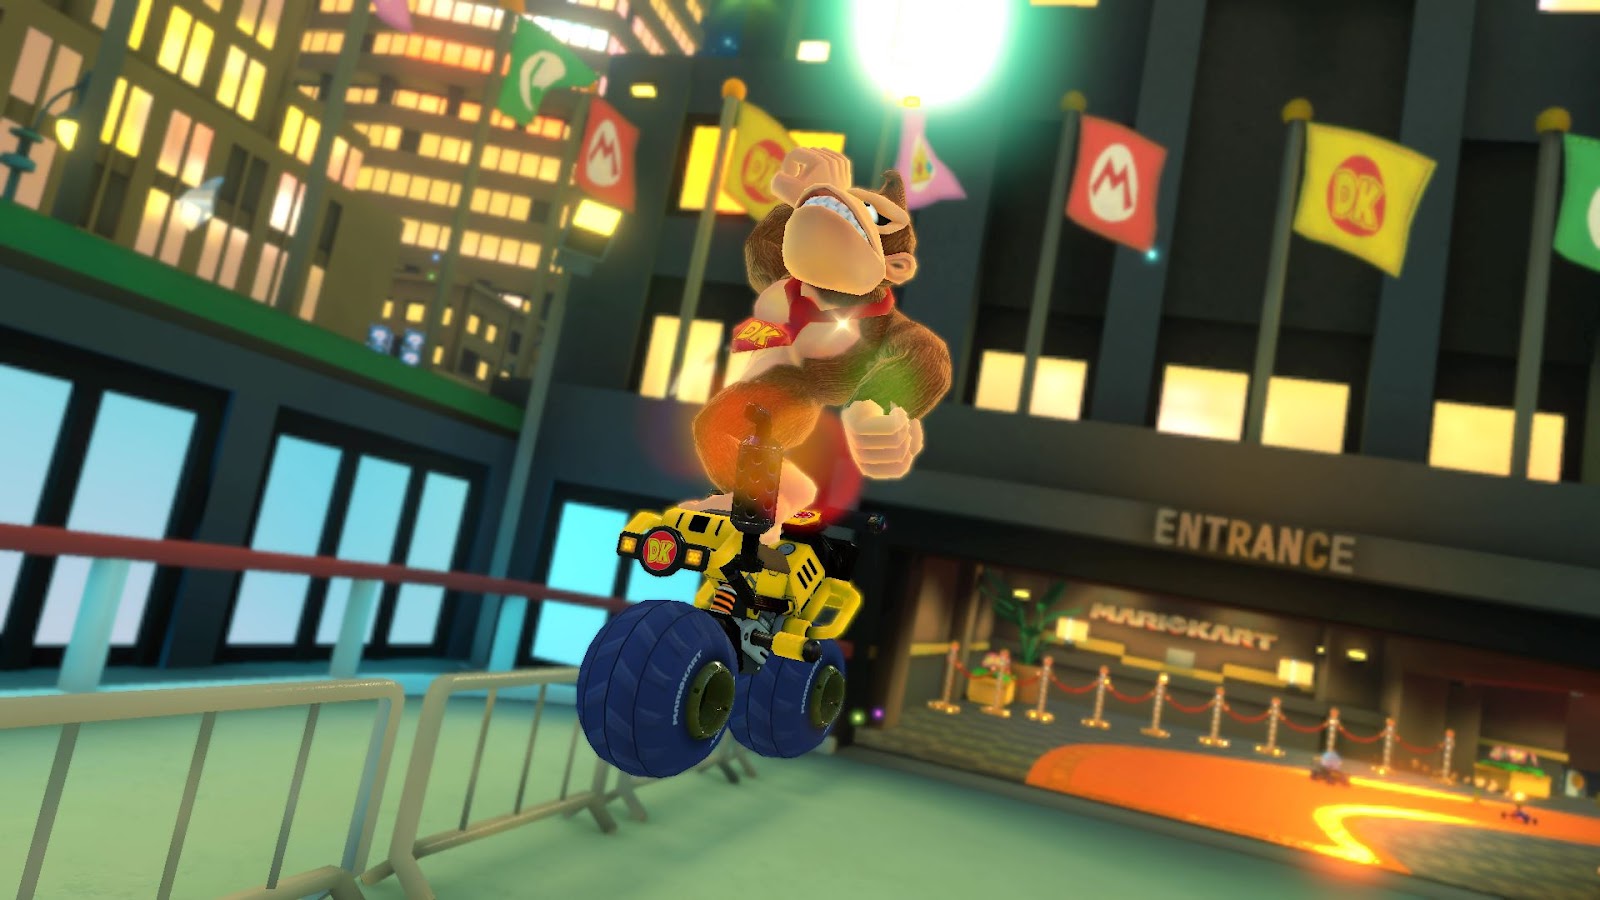 The Most Common Mistakes People Make When Trying to Get Three Stars in Mario Kart 8